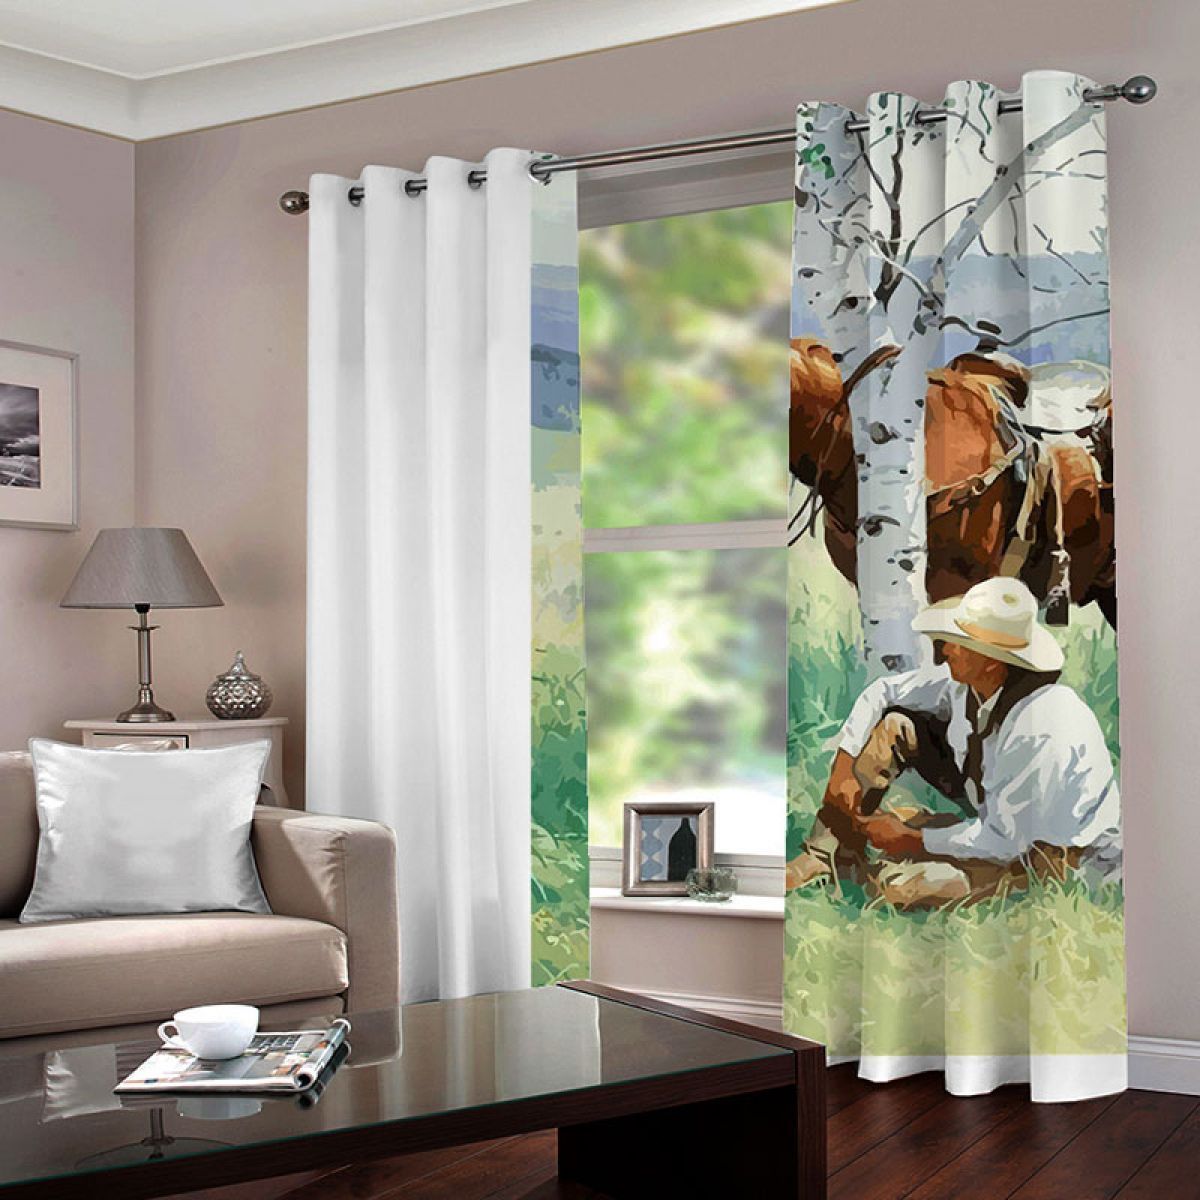 Man Sitting By The Horse And Dog Printed Window Curtain Home Decor